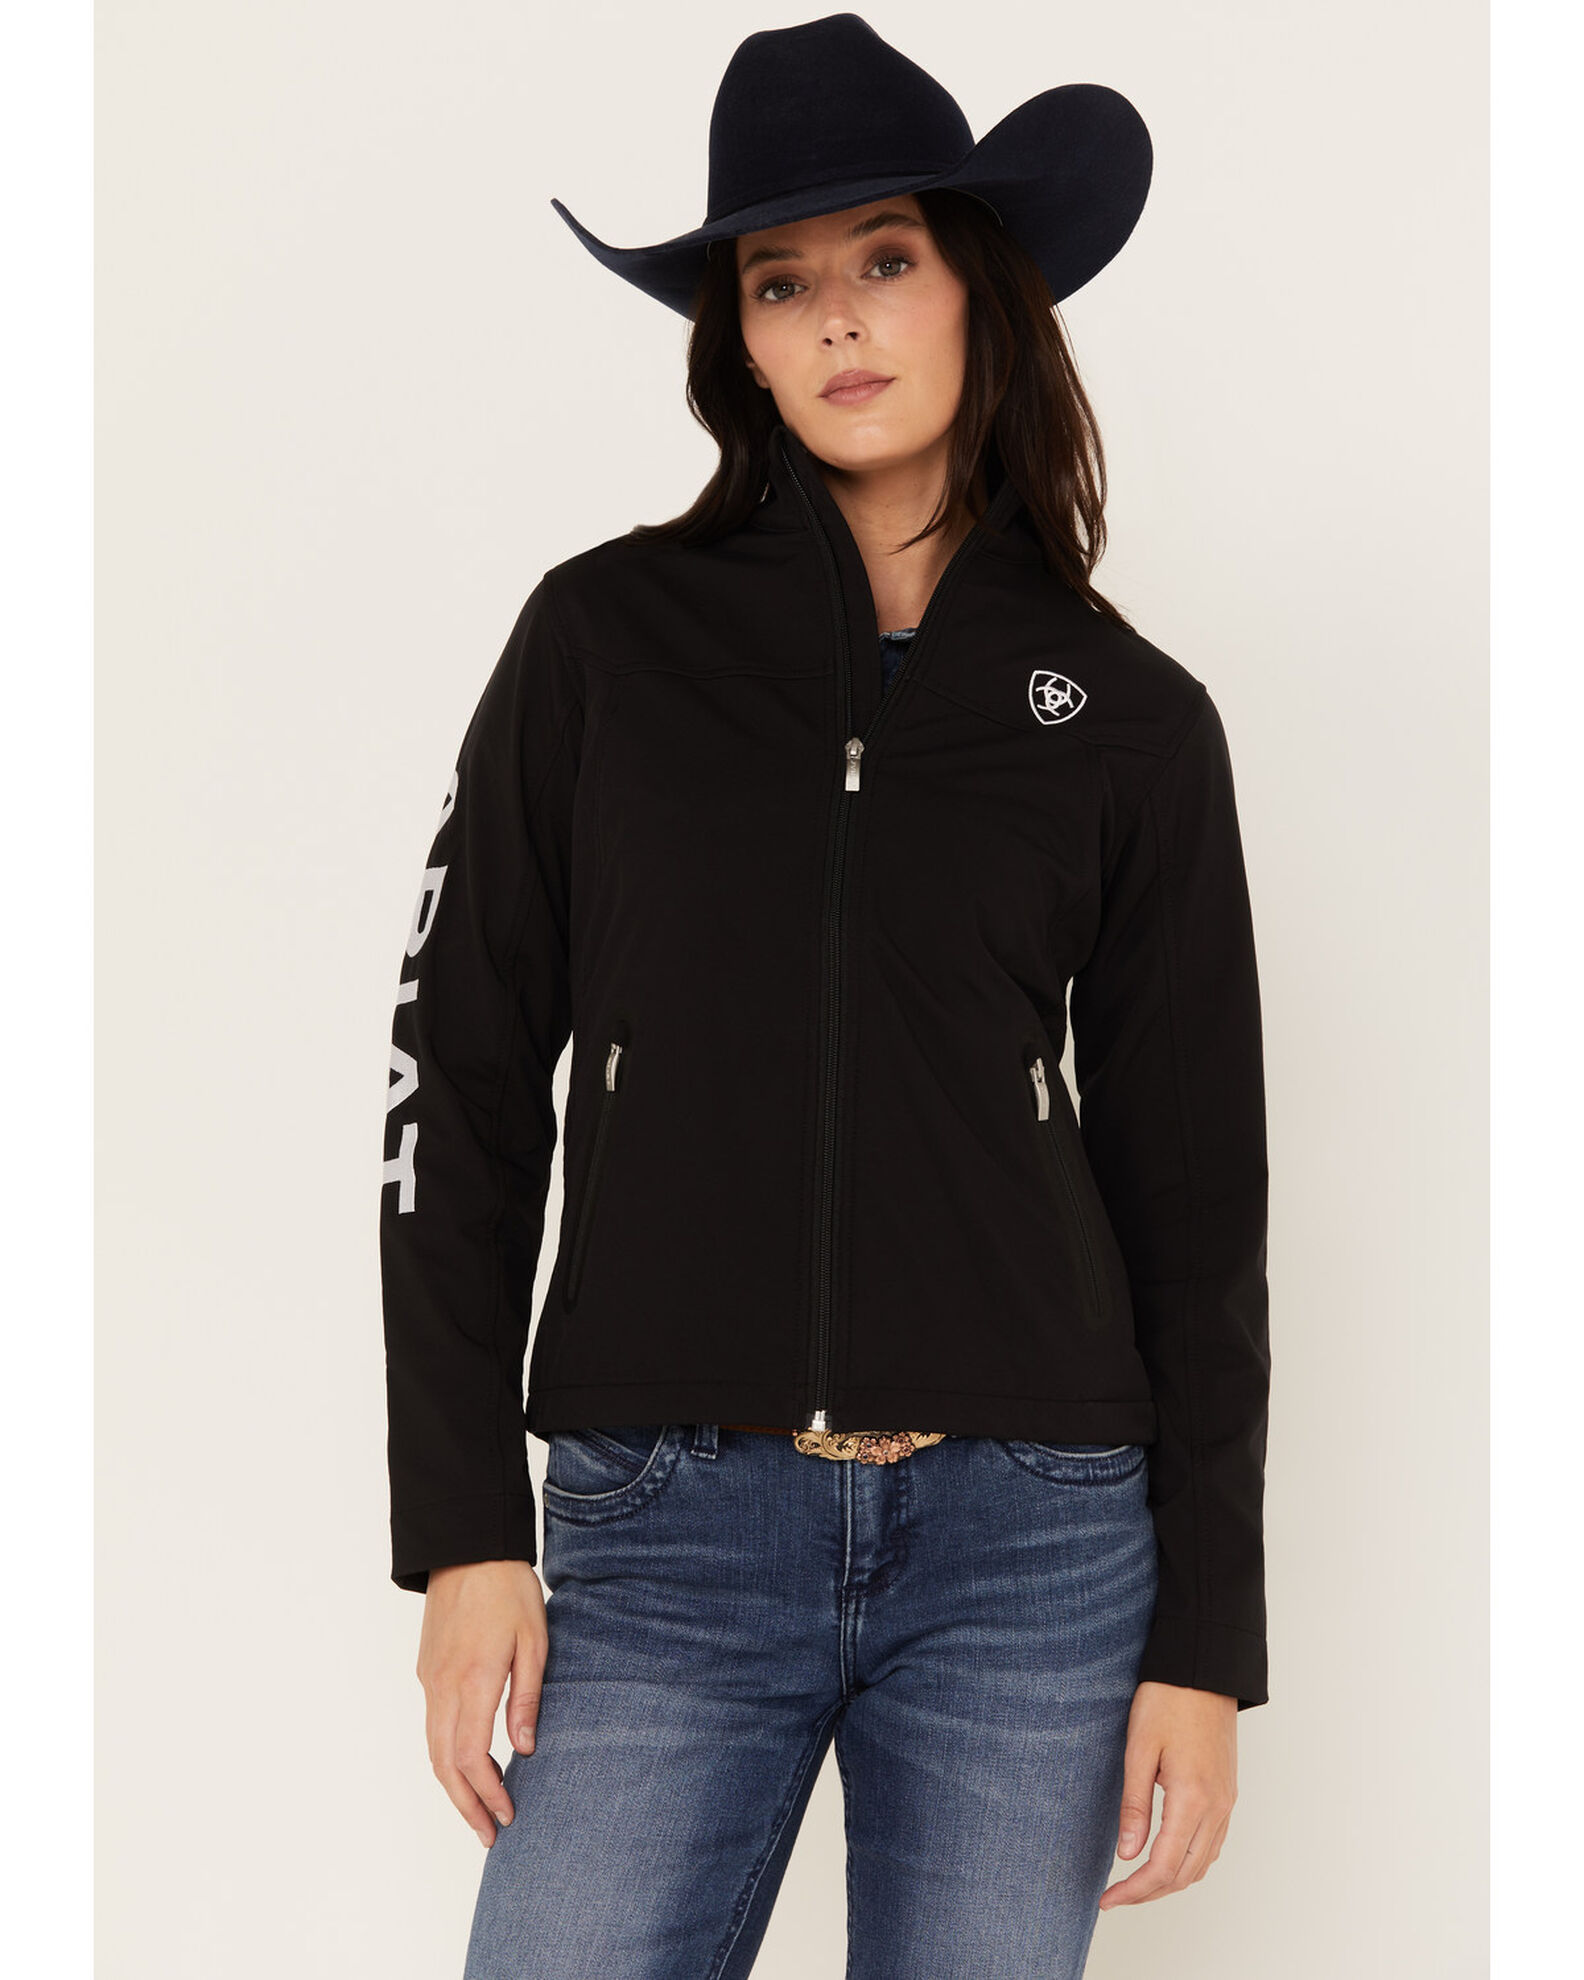 Product Name: Ariat Women's Softshell Team Jacket